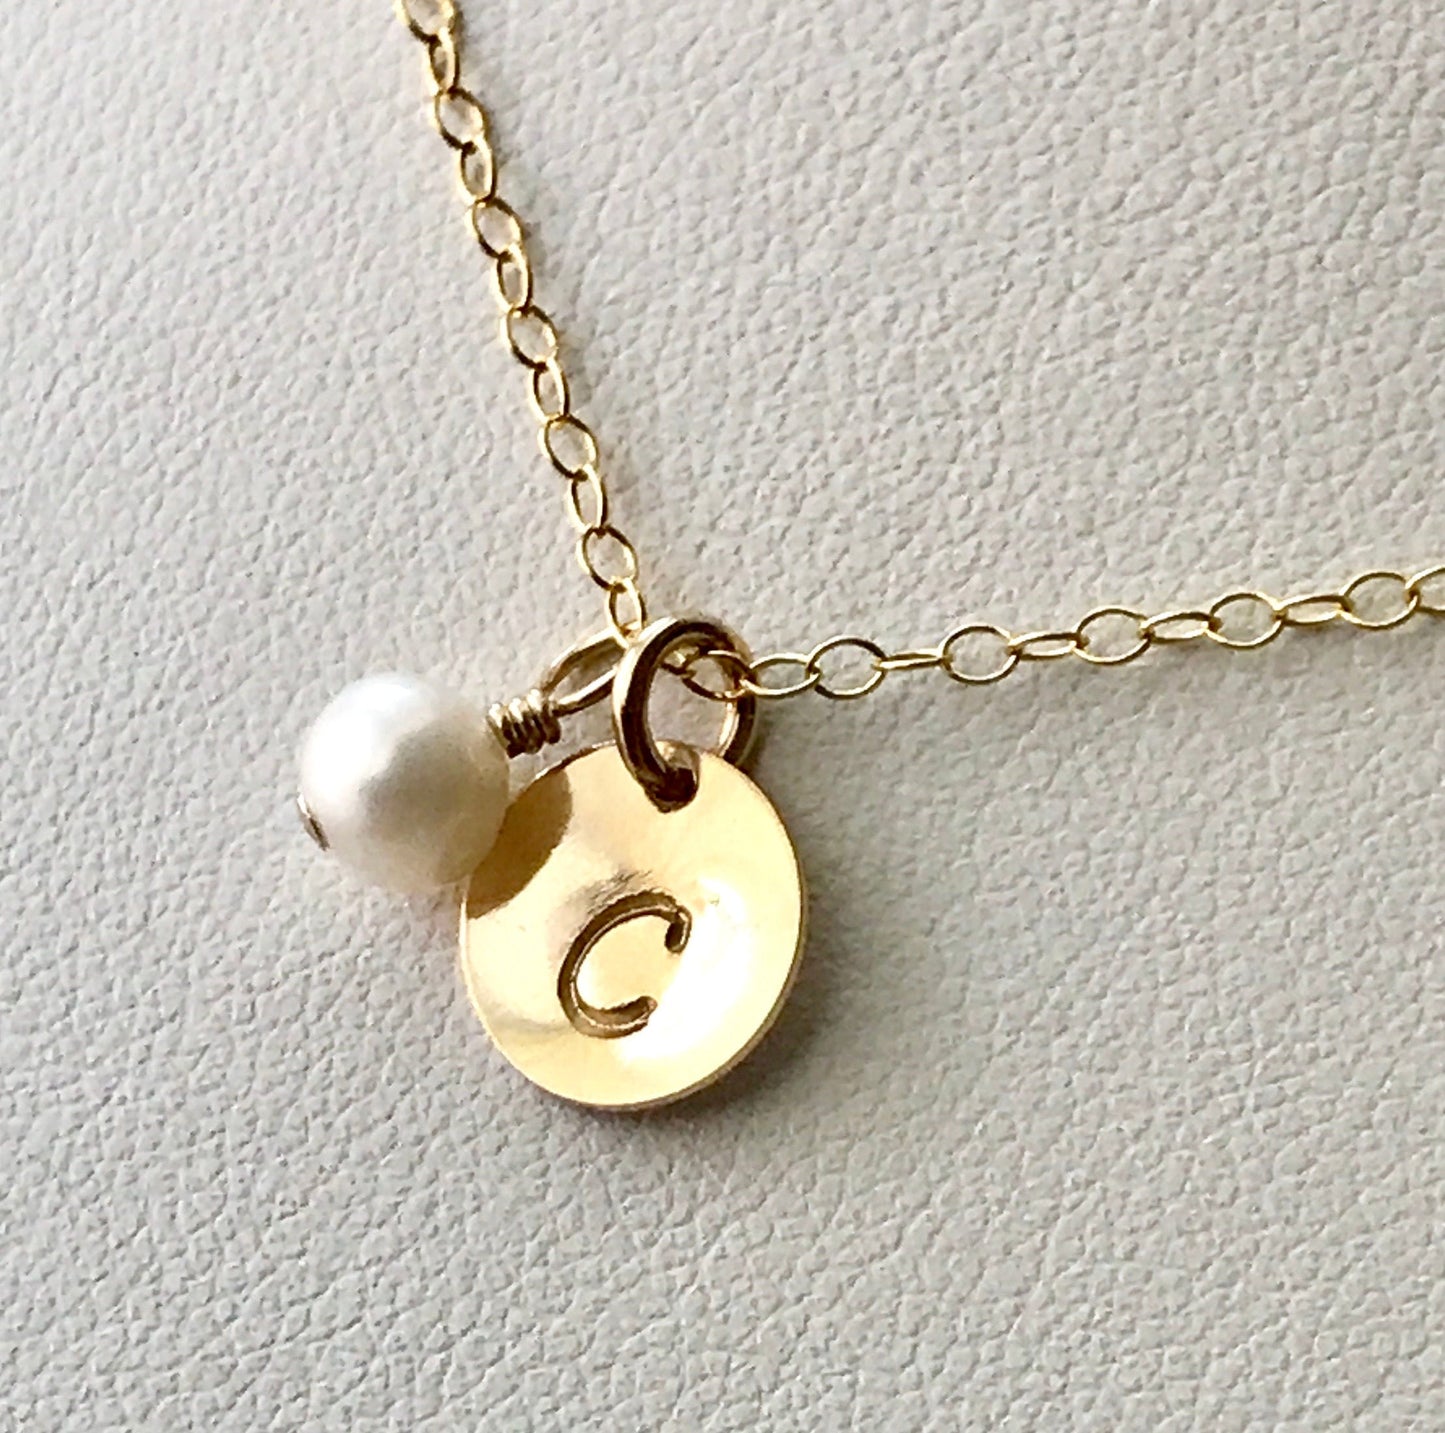 Personalized Flower Girl Gold Initial Necklace, Birthstone Gold Necklace,Dainty Personalized Initial Pearl Necklace,Toddler Flower Girl Gift